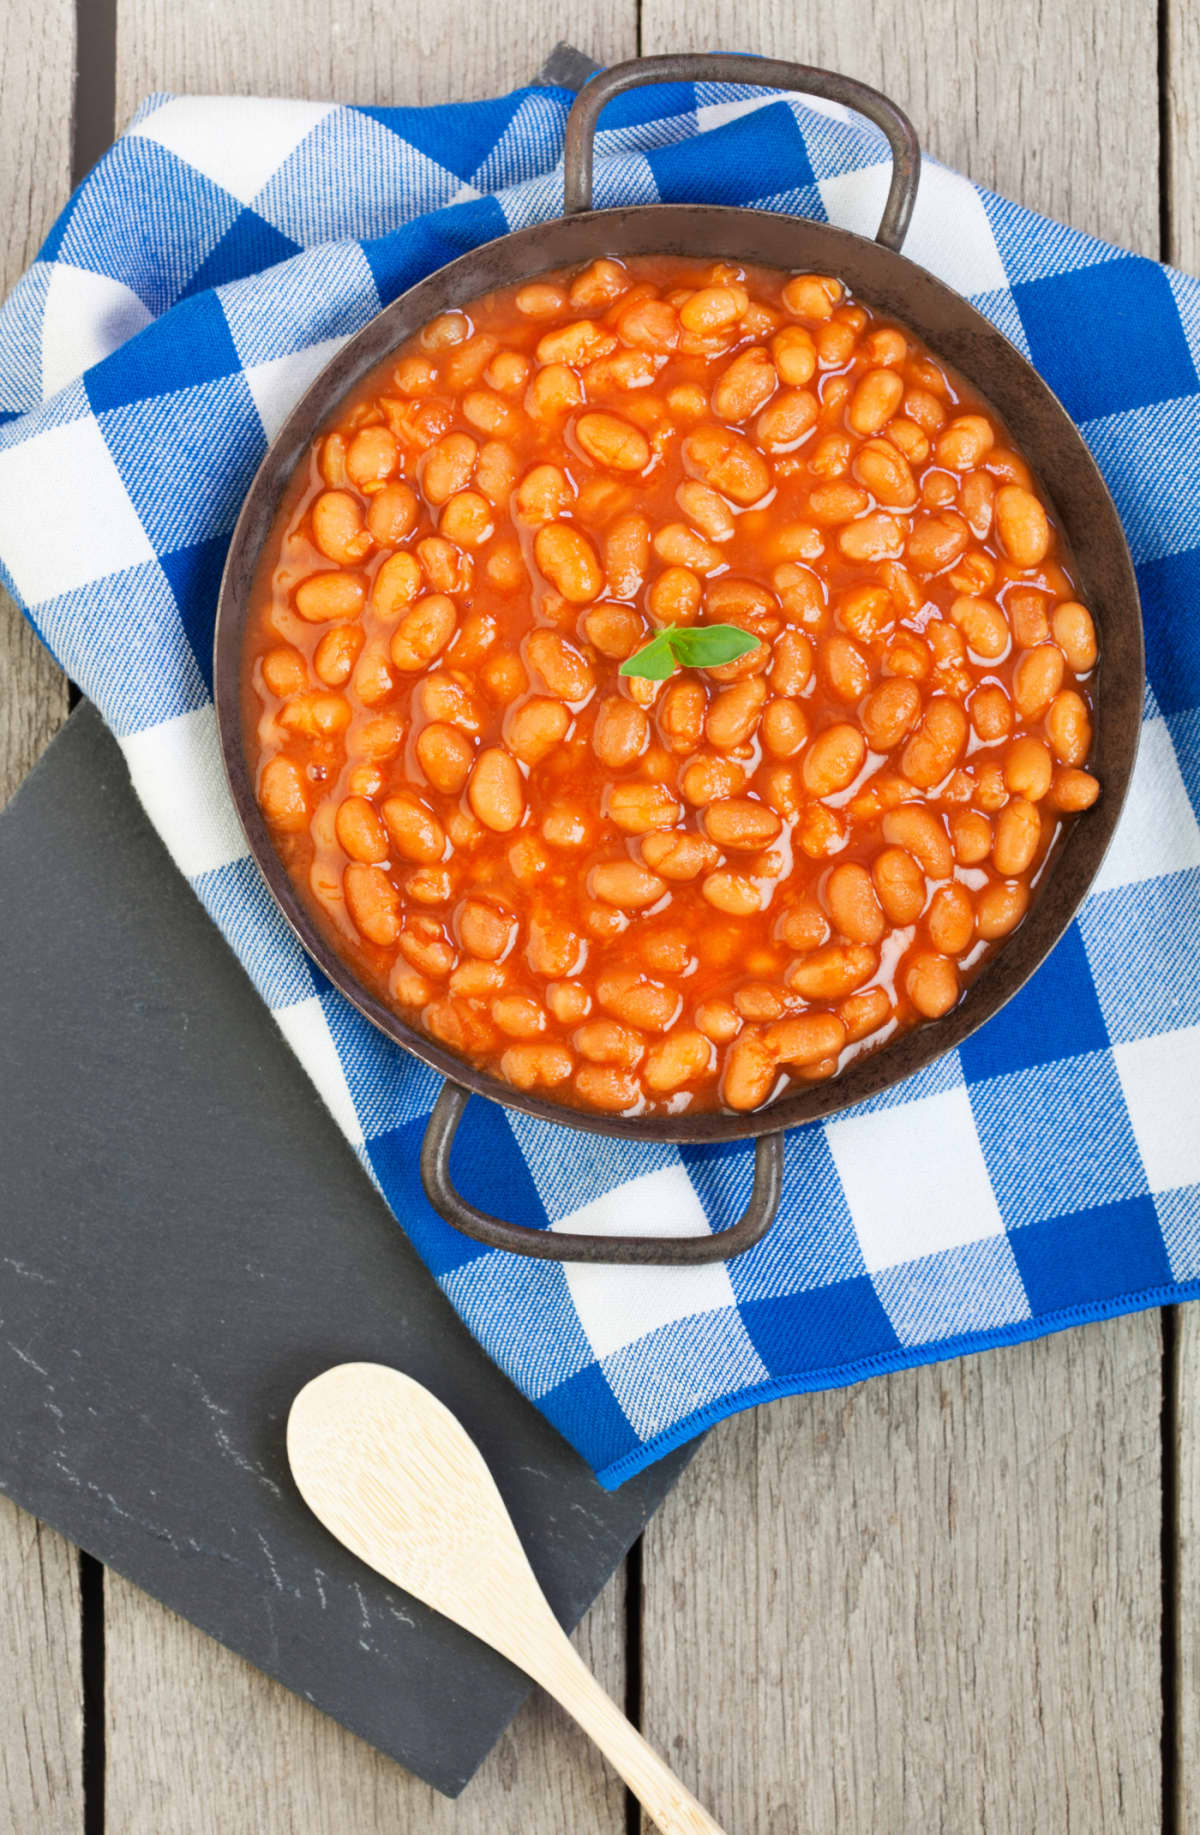 Classic baked beans in a rustic antique pan on blue picnic patterned towel